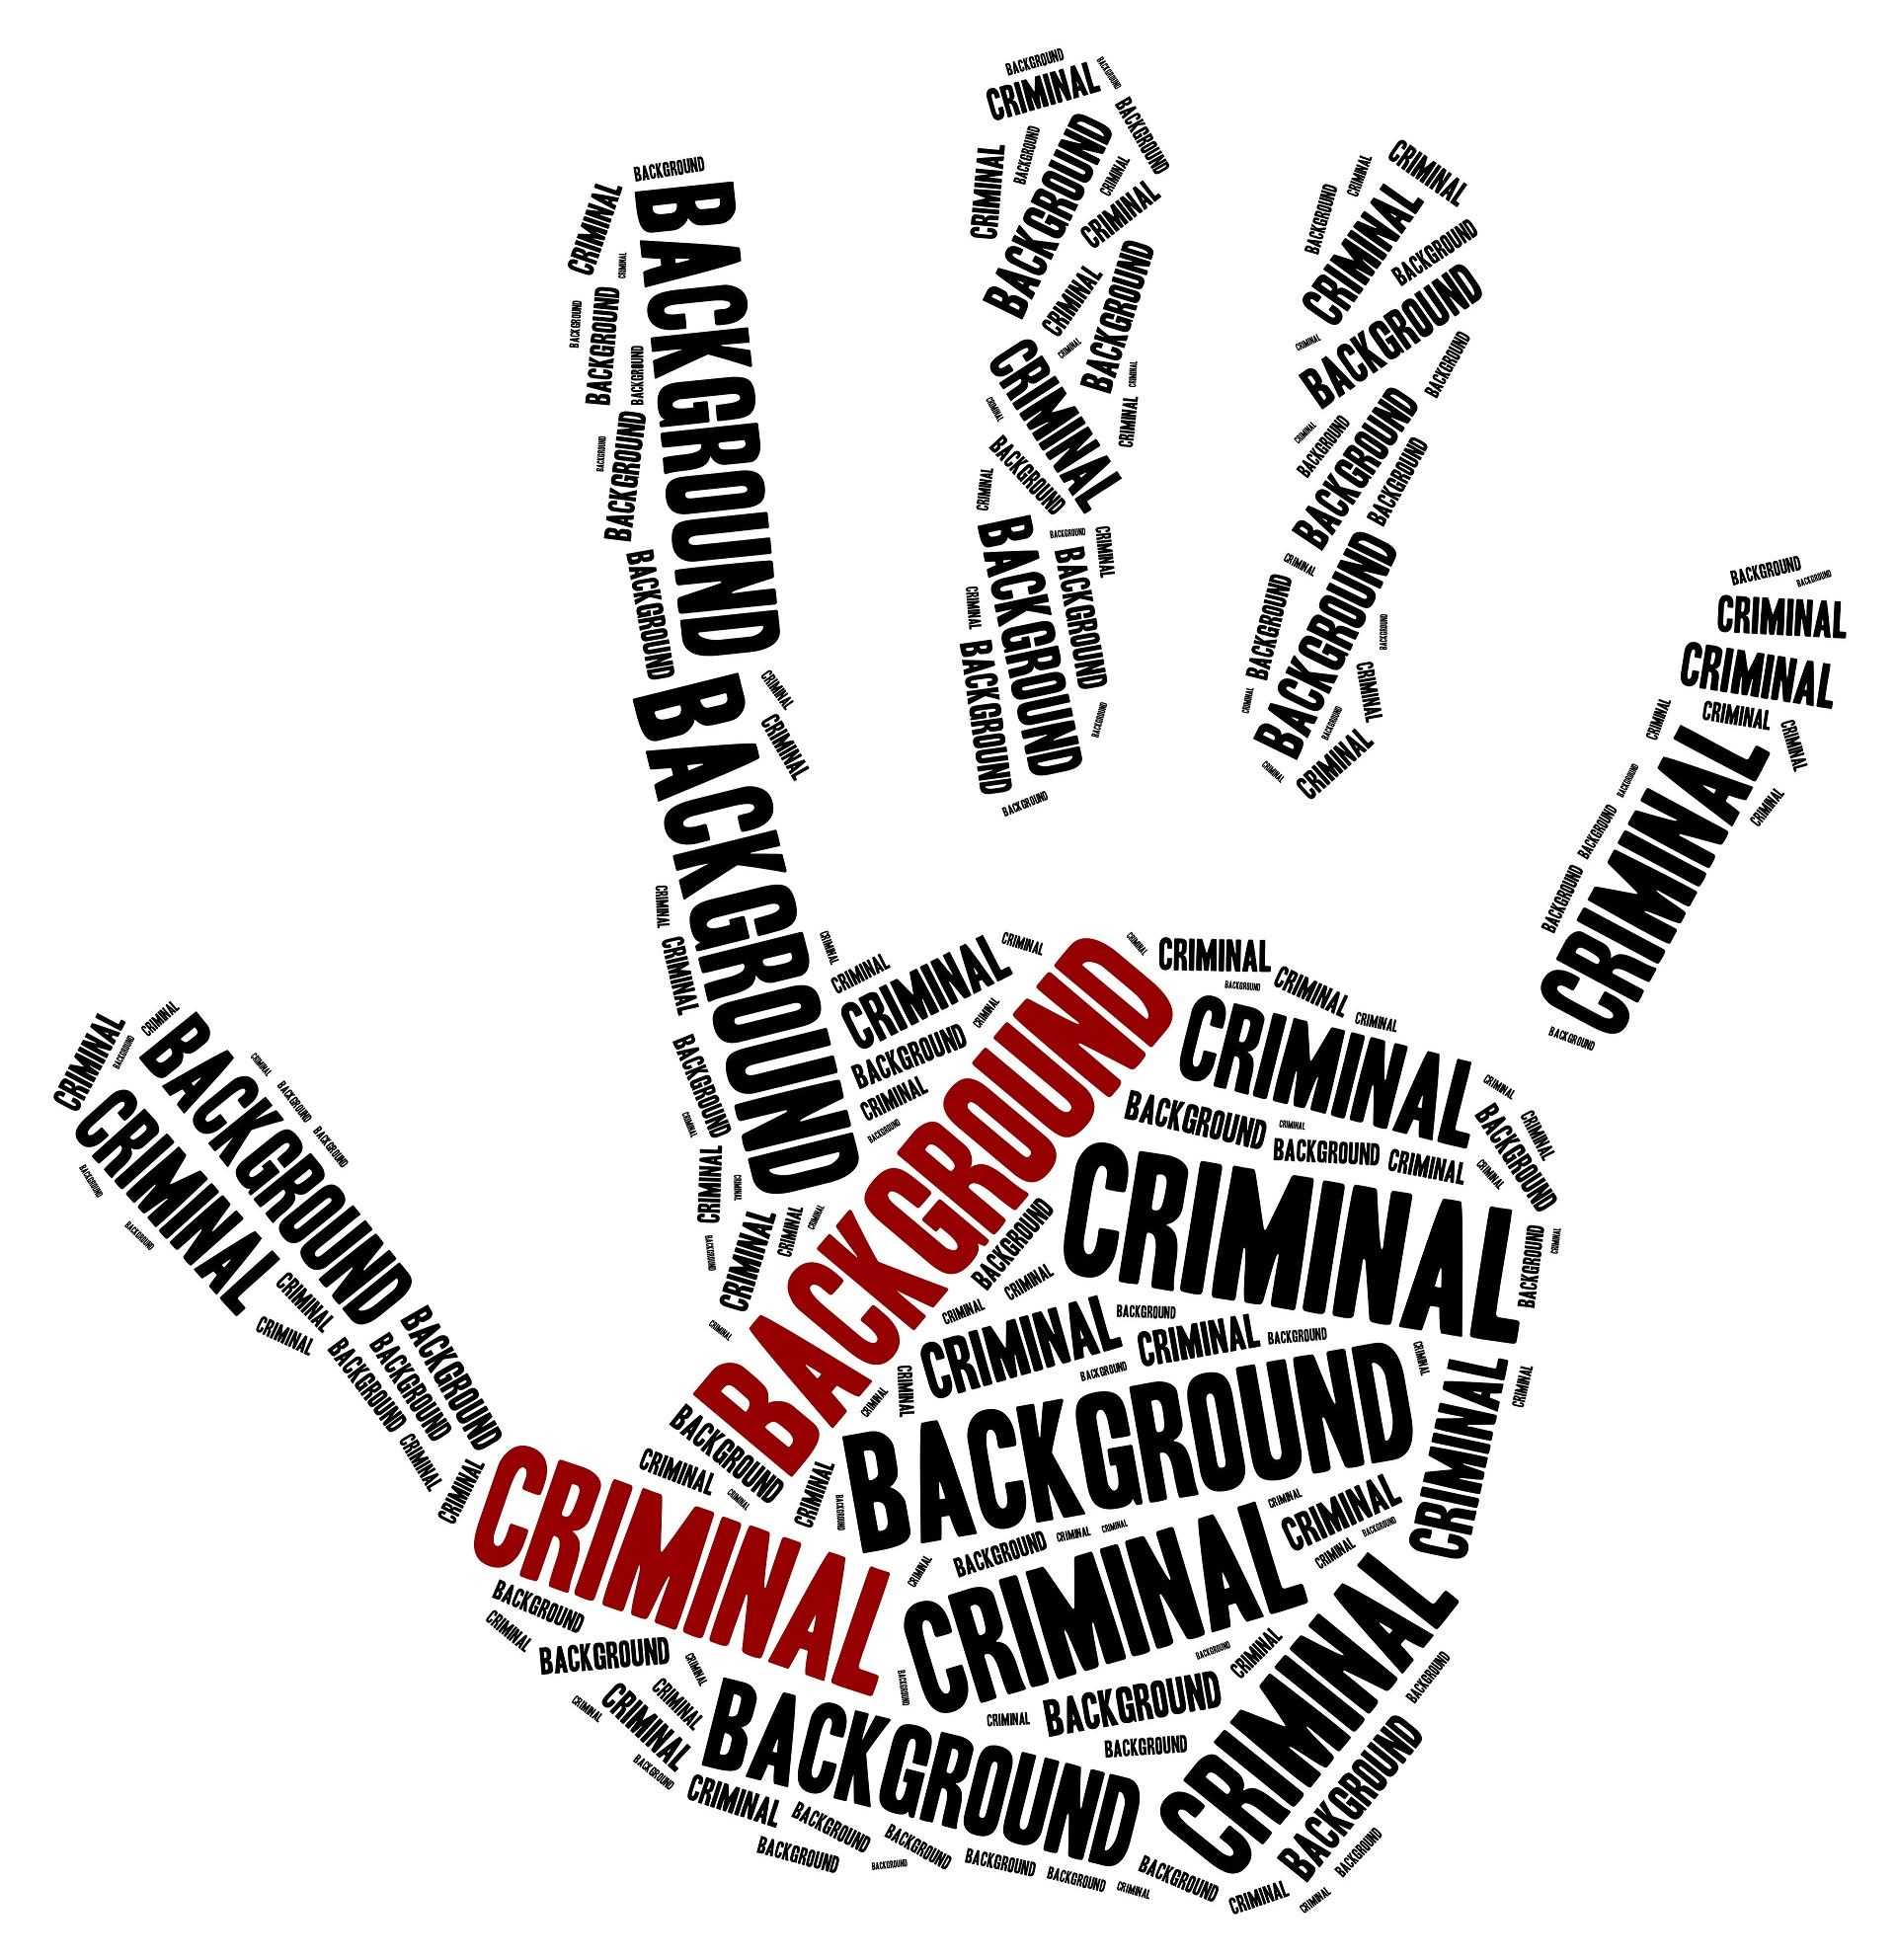 News - Is a criminal record holding you back professionally? - MIE